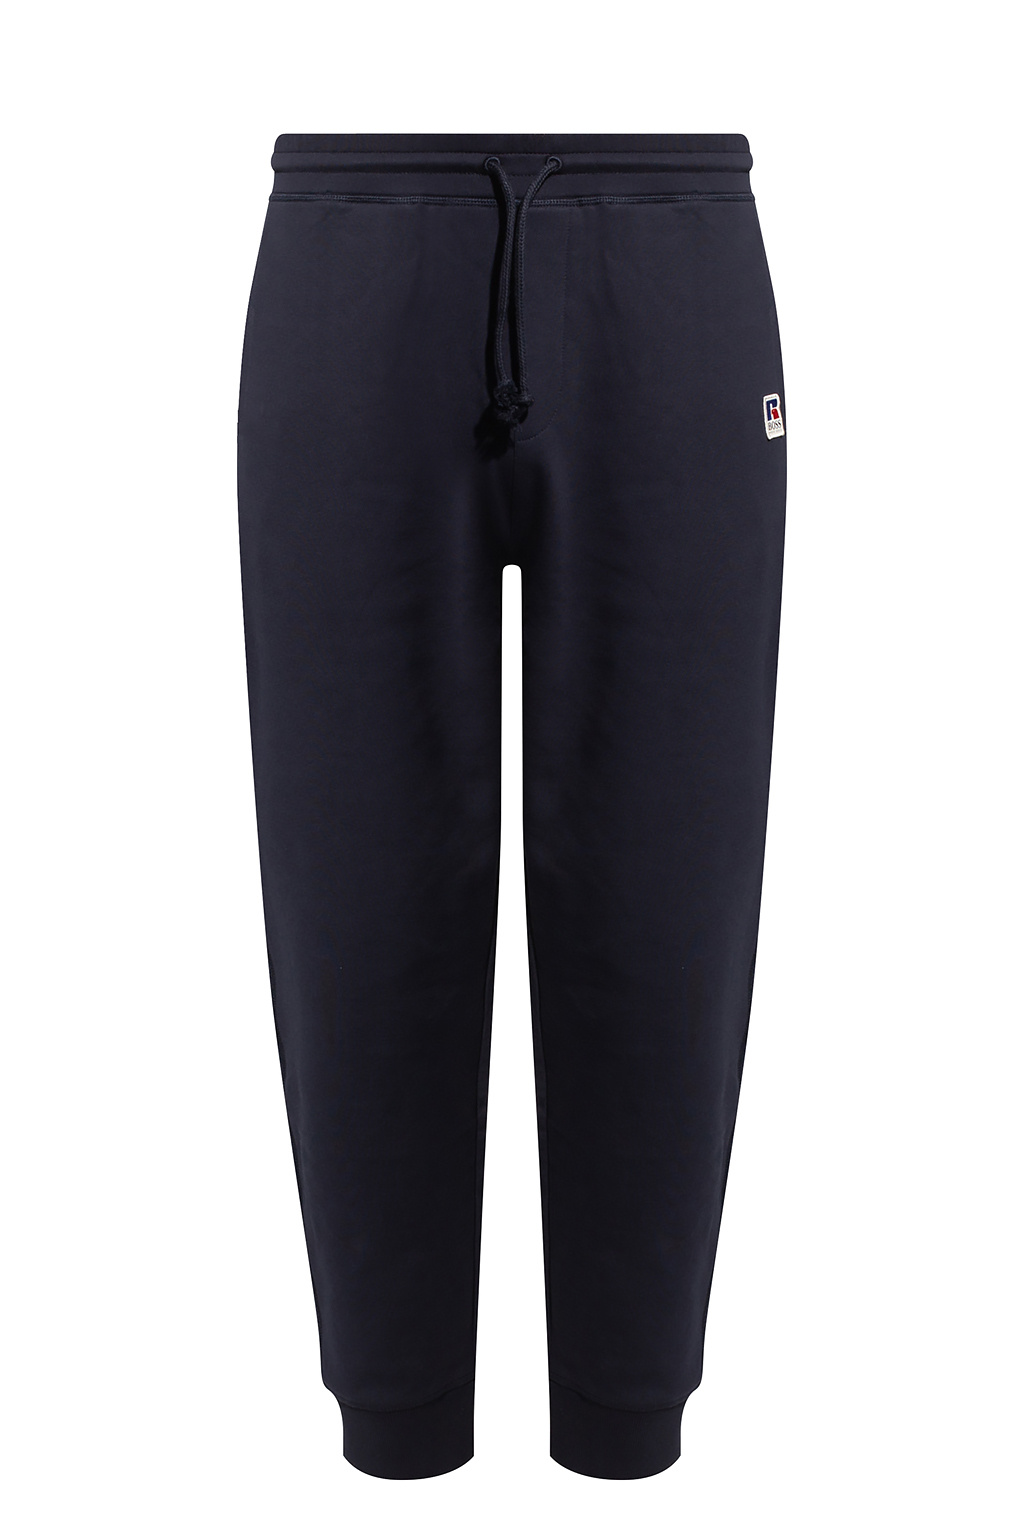 Fila French Terry Athletic Sweat Pants for Women